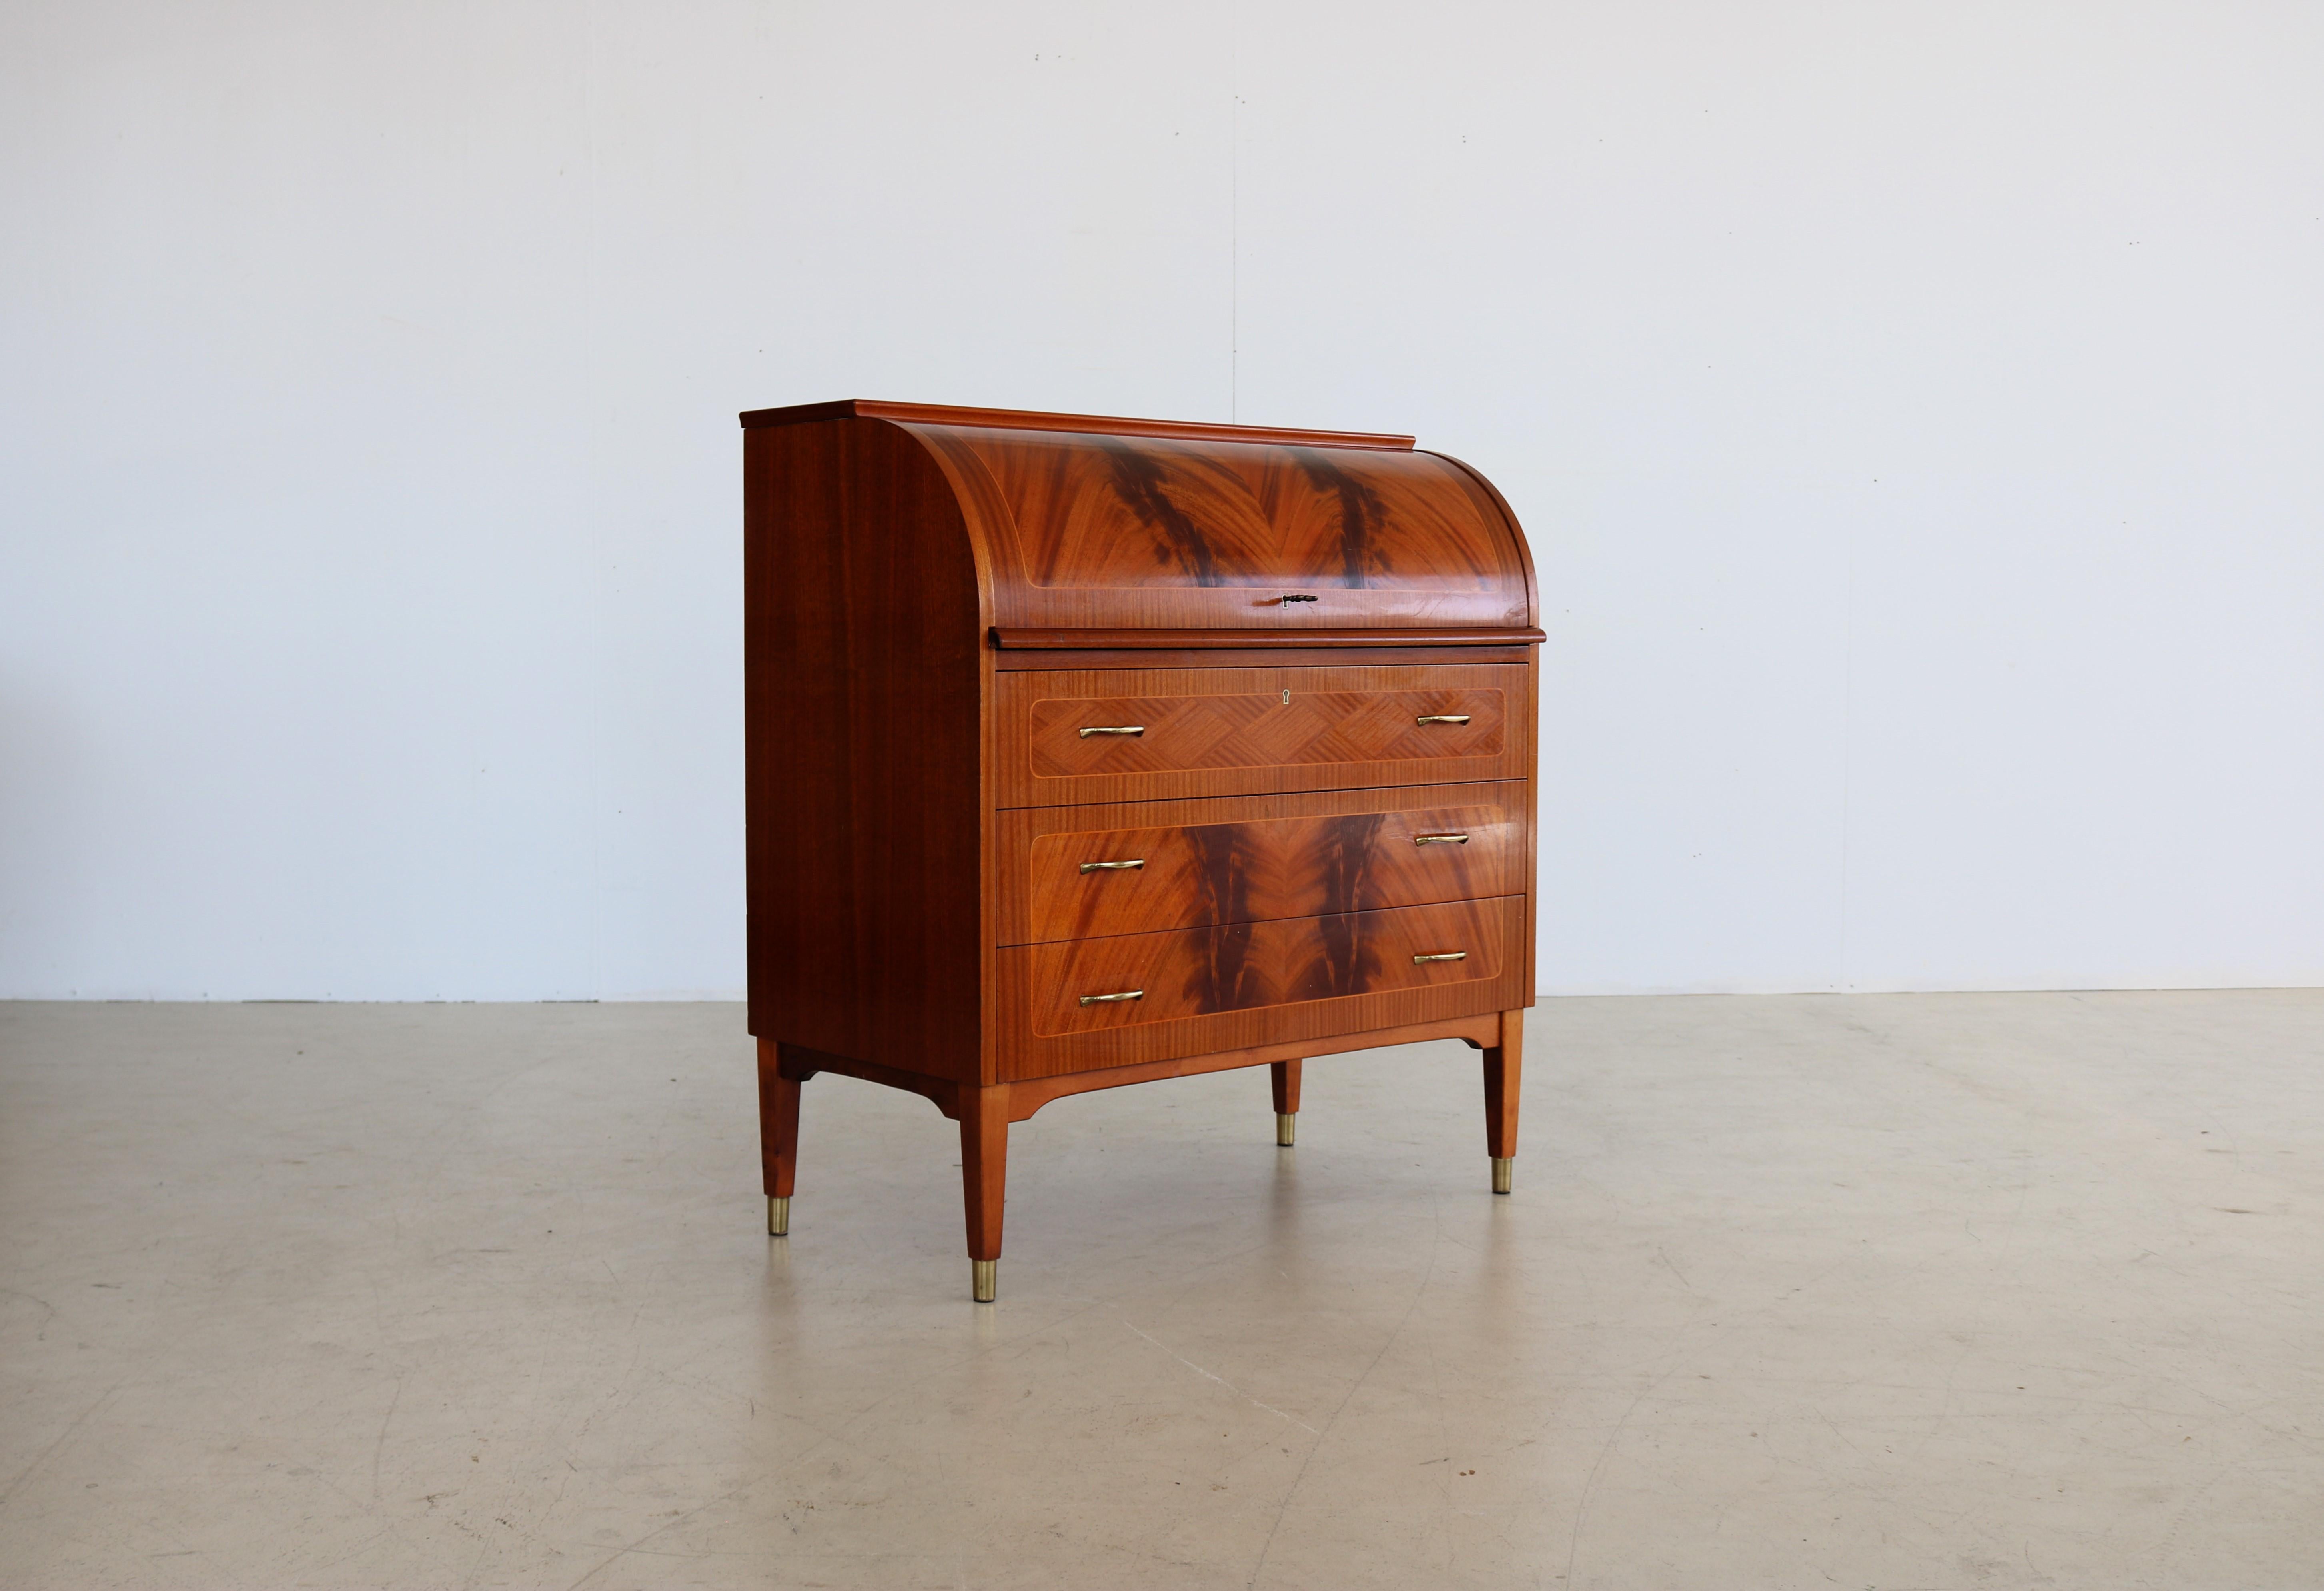 vintage secretary desk cabinet 60s Ostergaard

period 60s
designs Egon Ostergaard SMI Sweden
conditions good light signs of use
Size 97 x 90 x 47 (hxwxd)

details teak; roll top;

article number 2041.